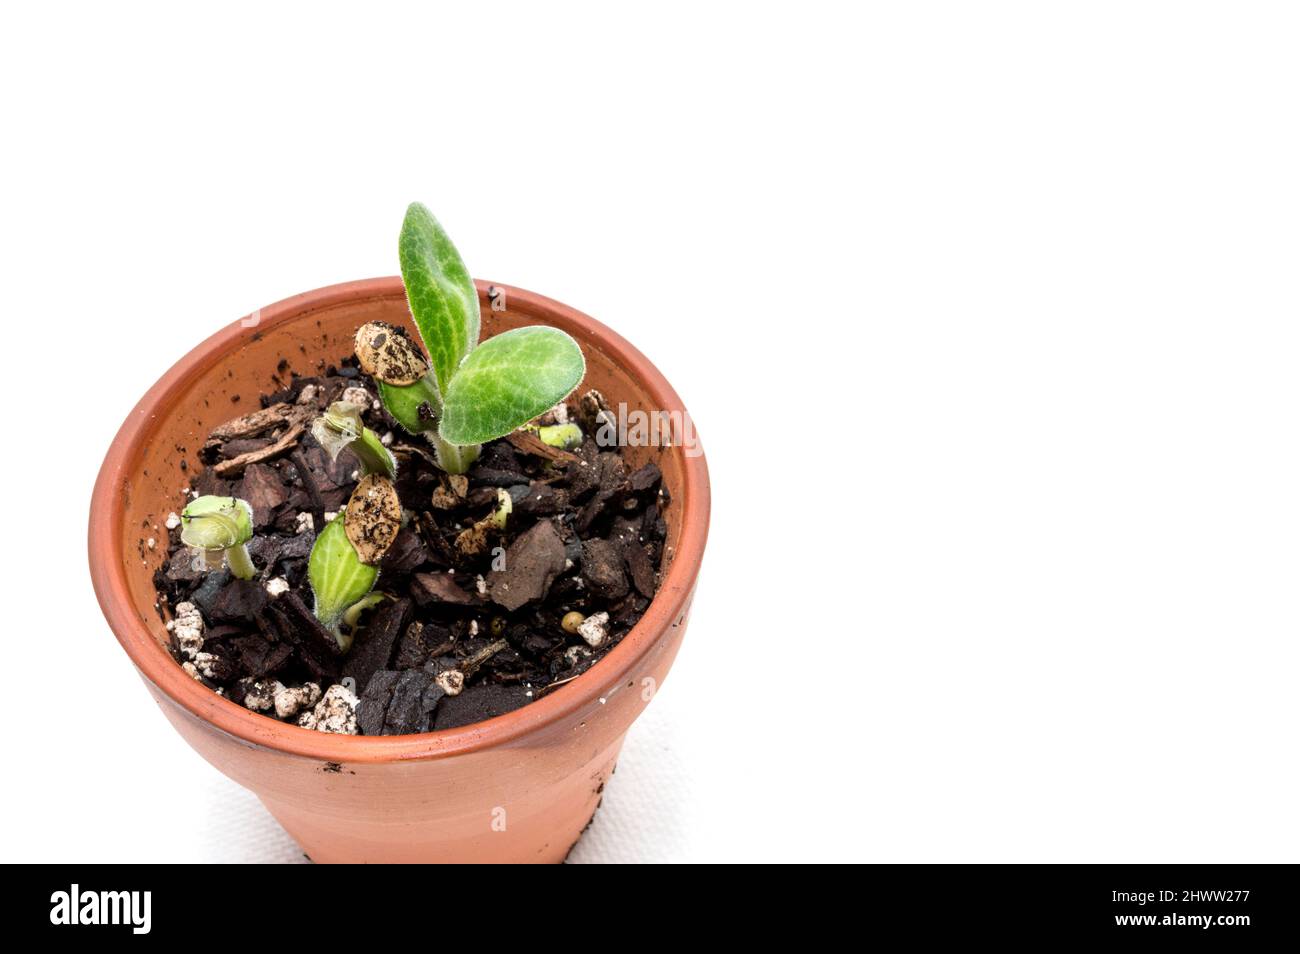 Horizontal shot of squash seed sprouts in a clay pot on a white background with copy space to the right. Stock Photo